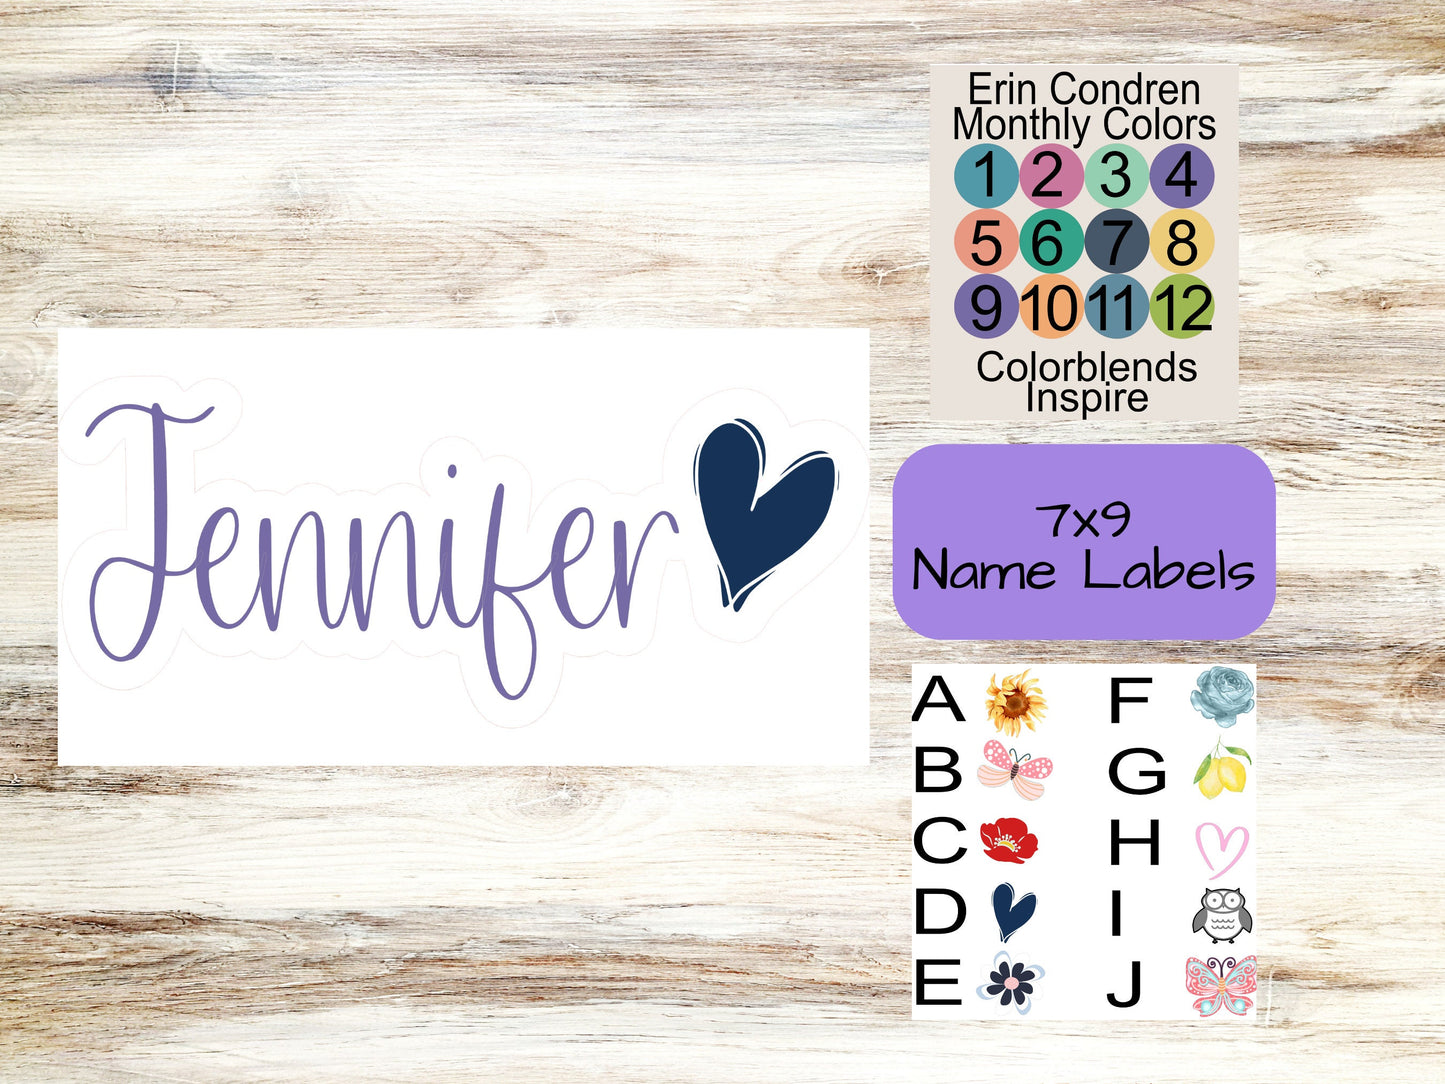 7x9 Inspire Daily Name Label || Name Decal for INSPIRE || Planner Decals || Planner Name Decals